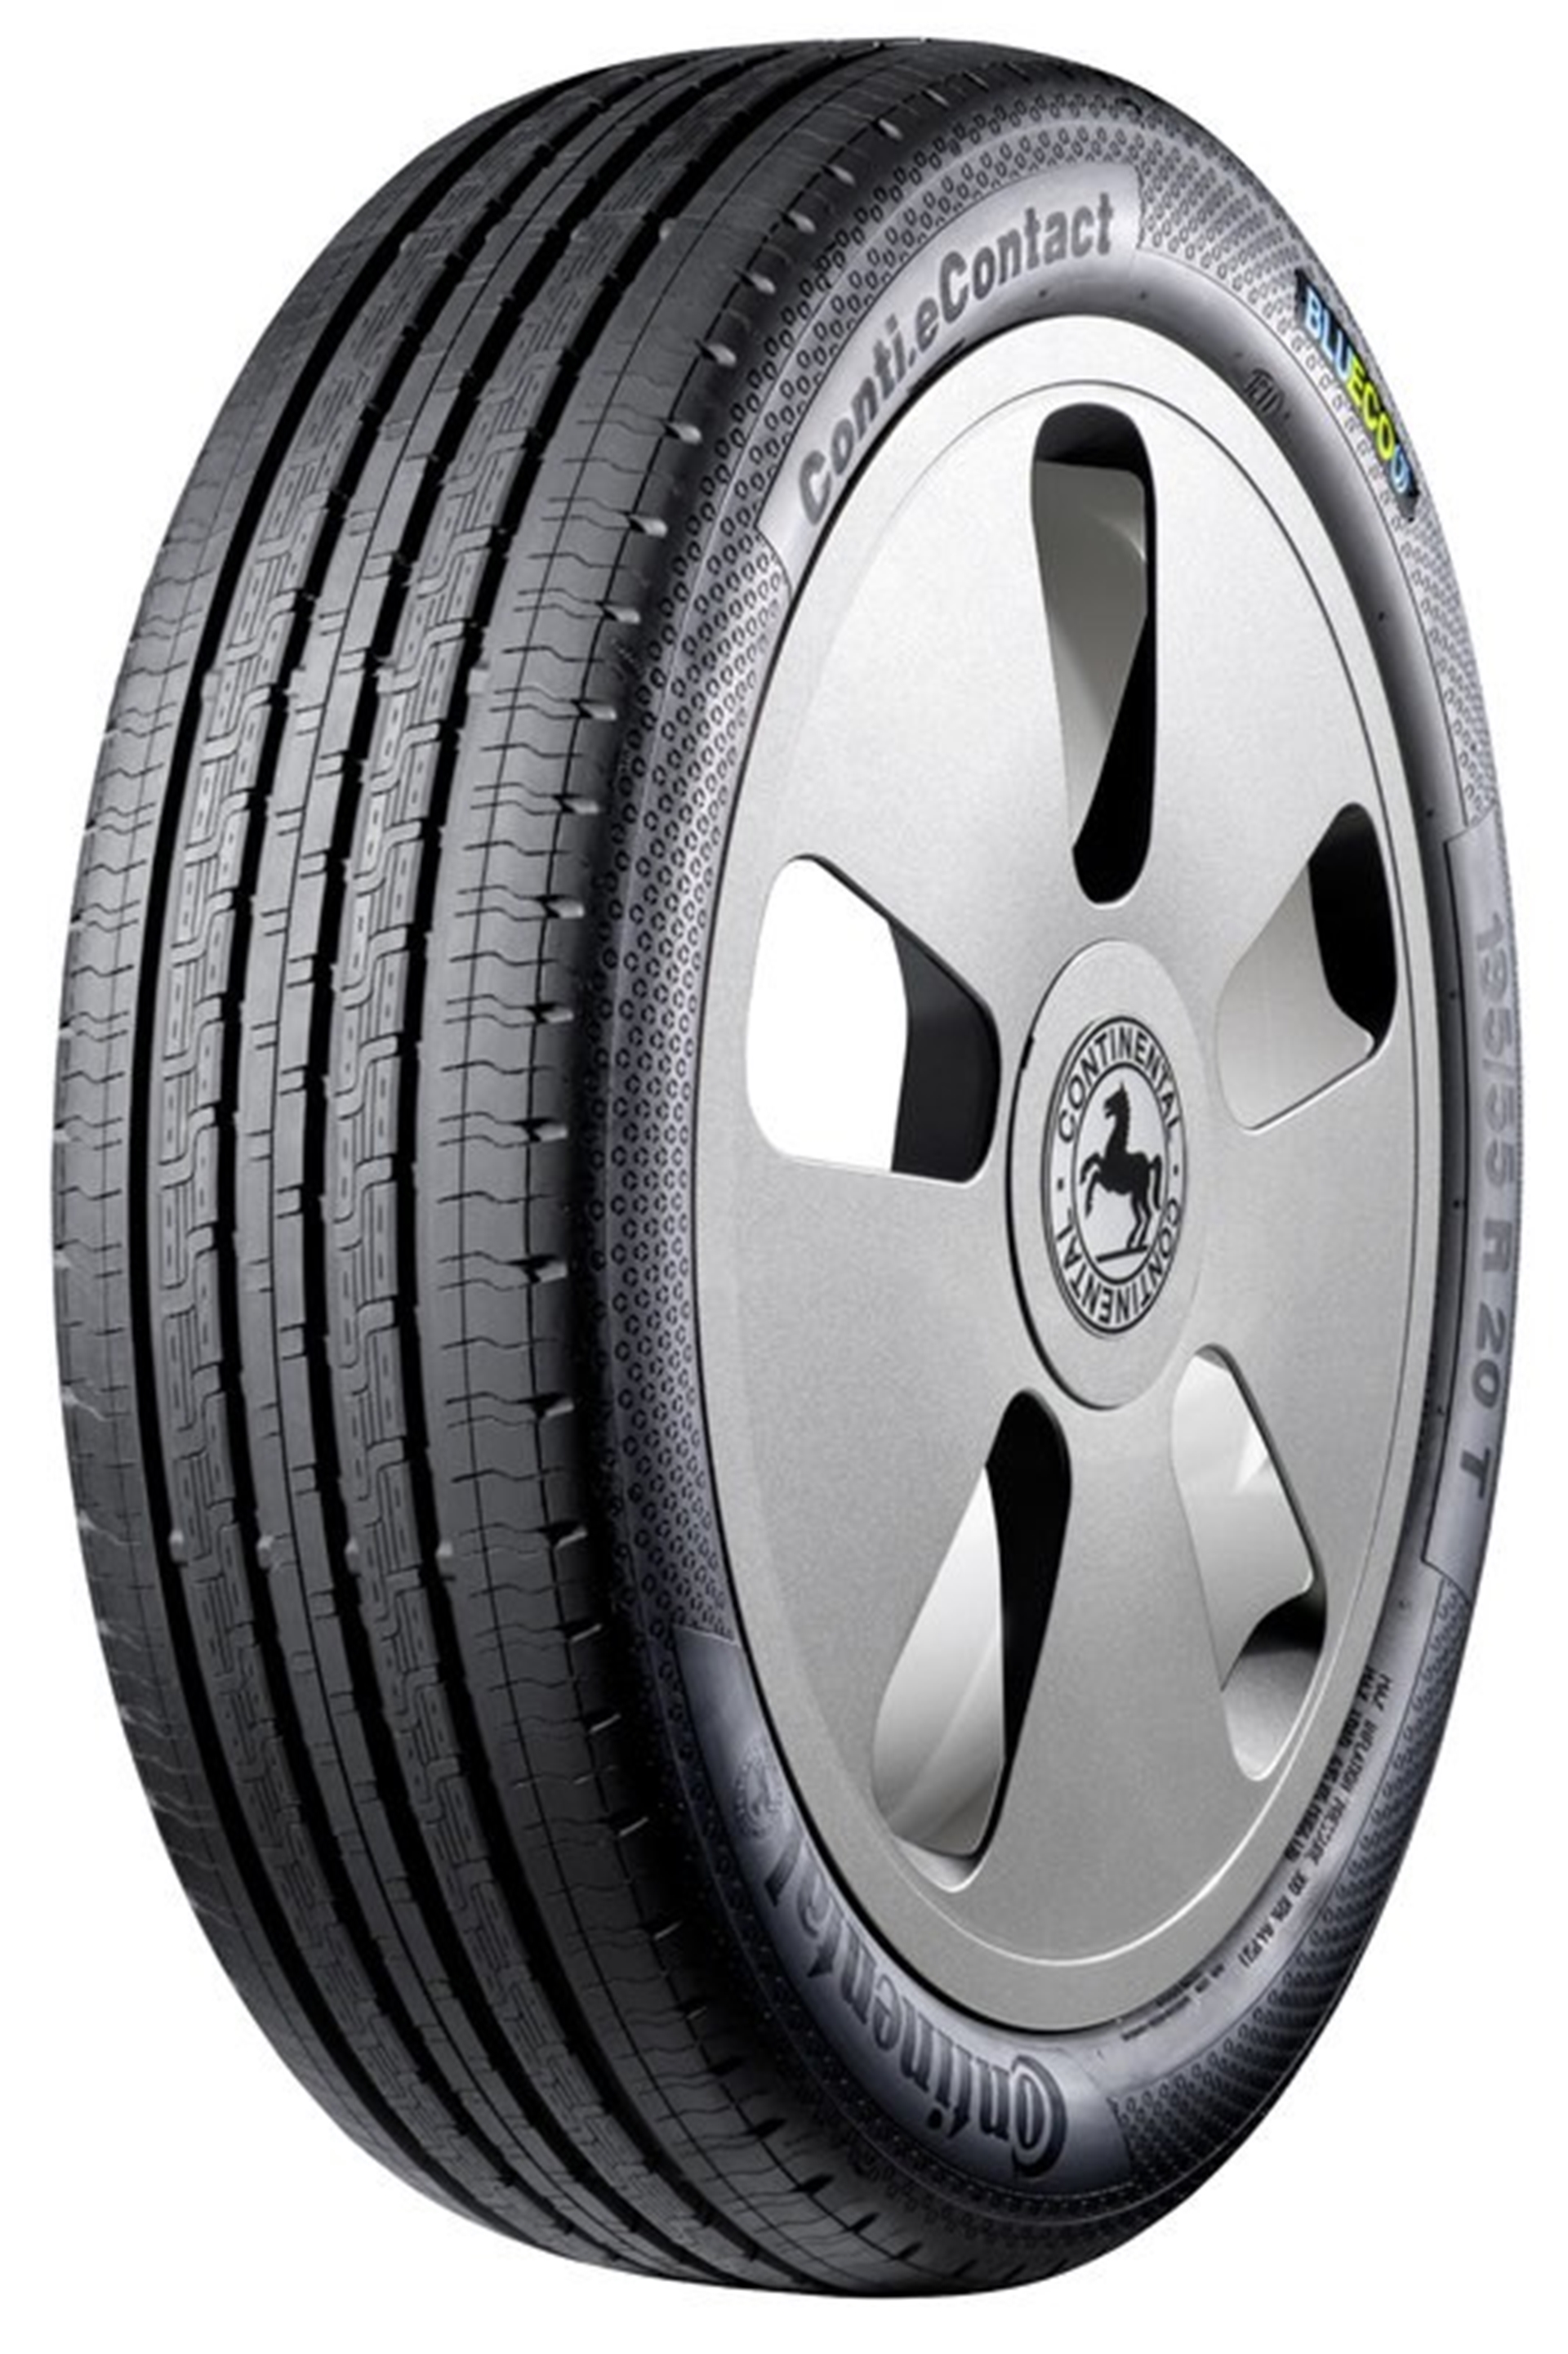 CONTI.eCONTACT – THE ULTIMATE TYRE FOR ELECTRIC VEHICLES